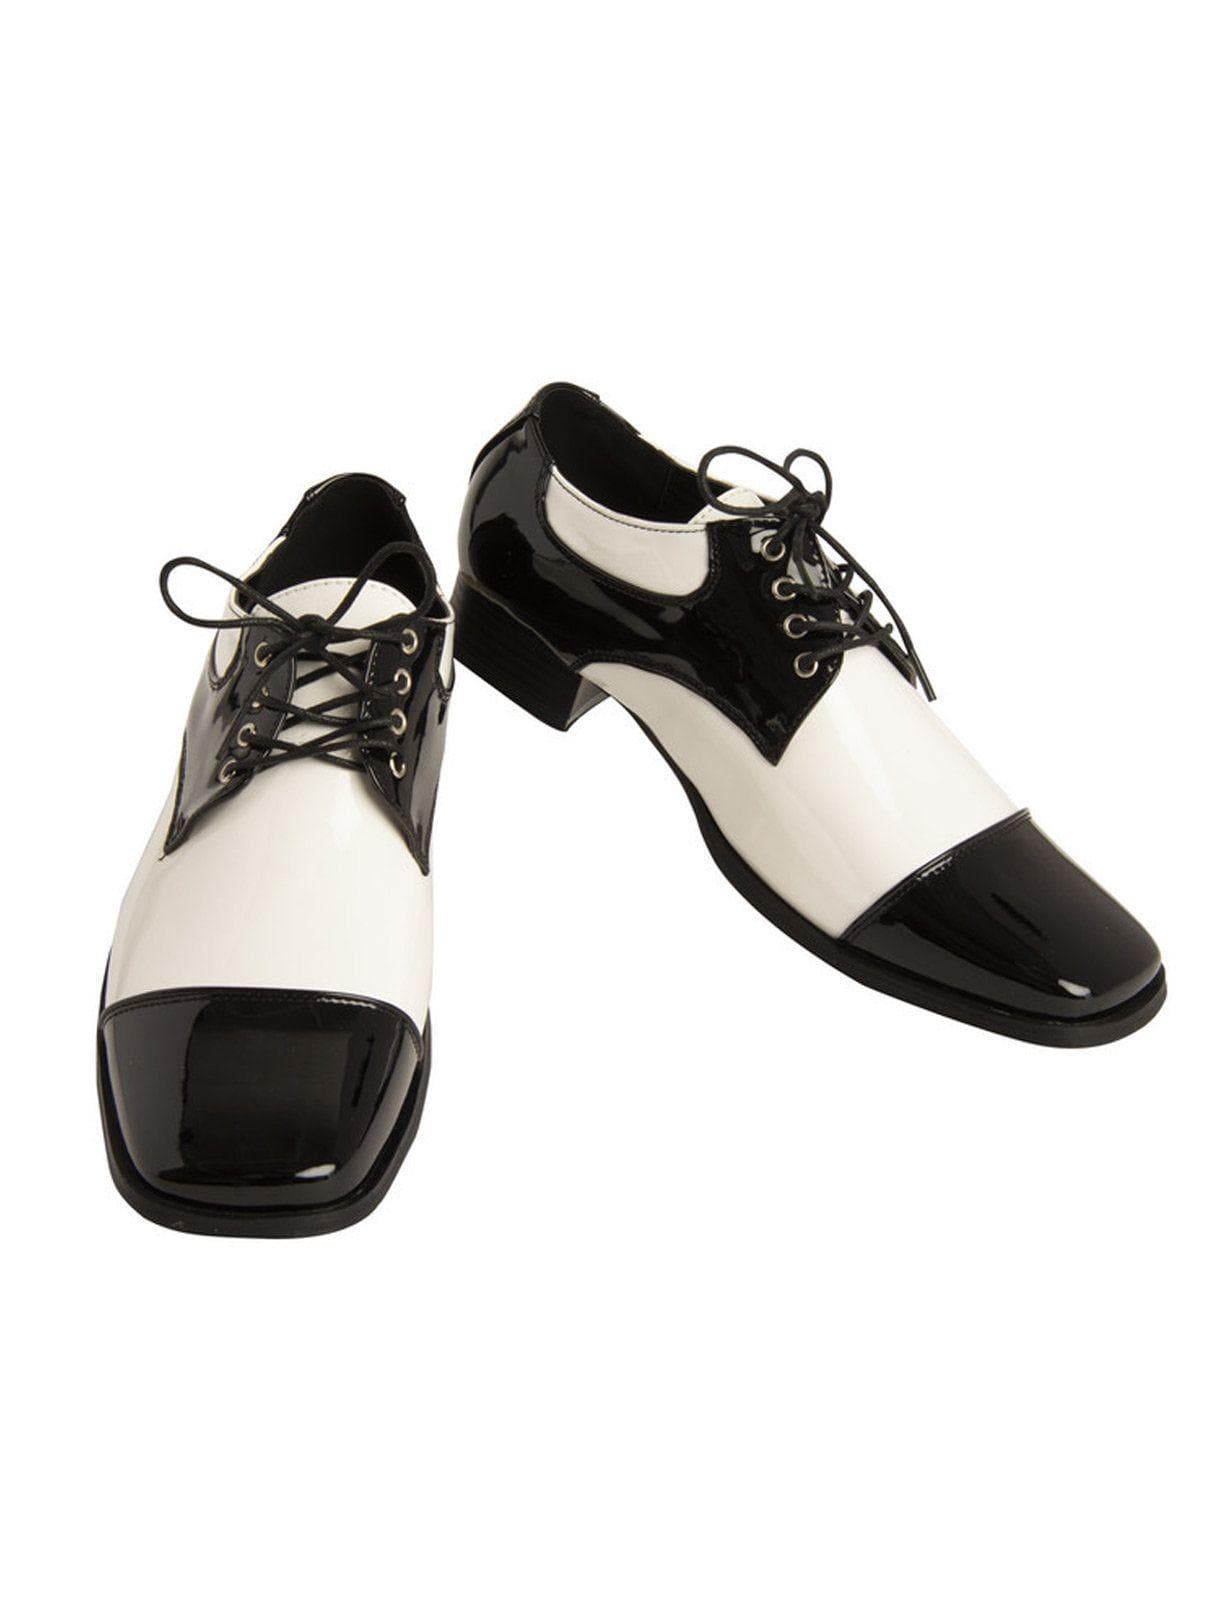 Gangster Mens Wing Tip Shoes - costumes.com